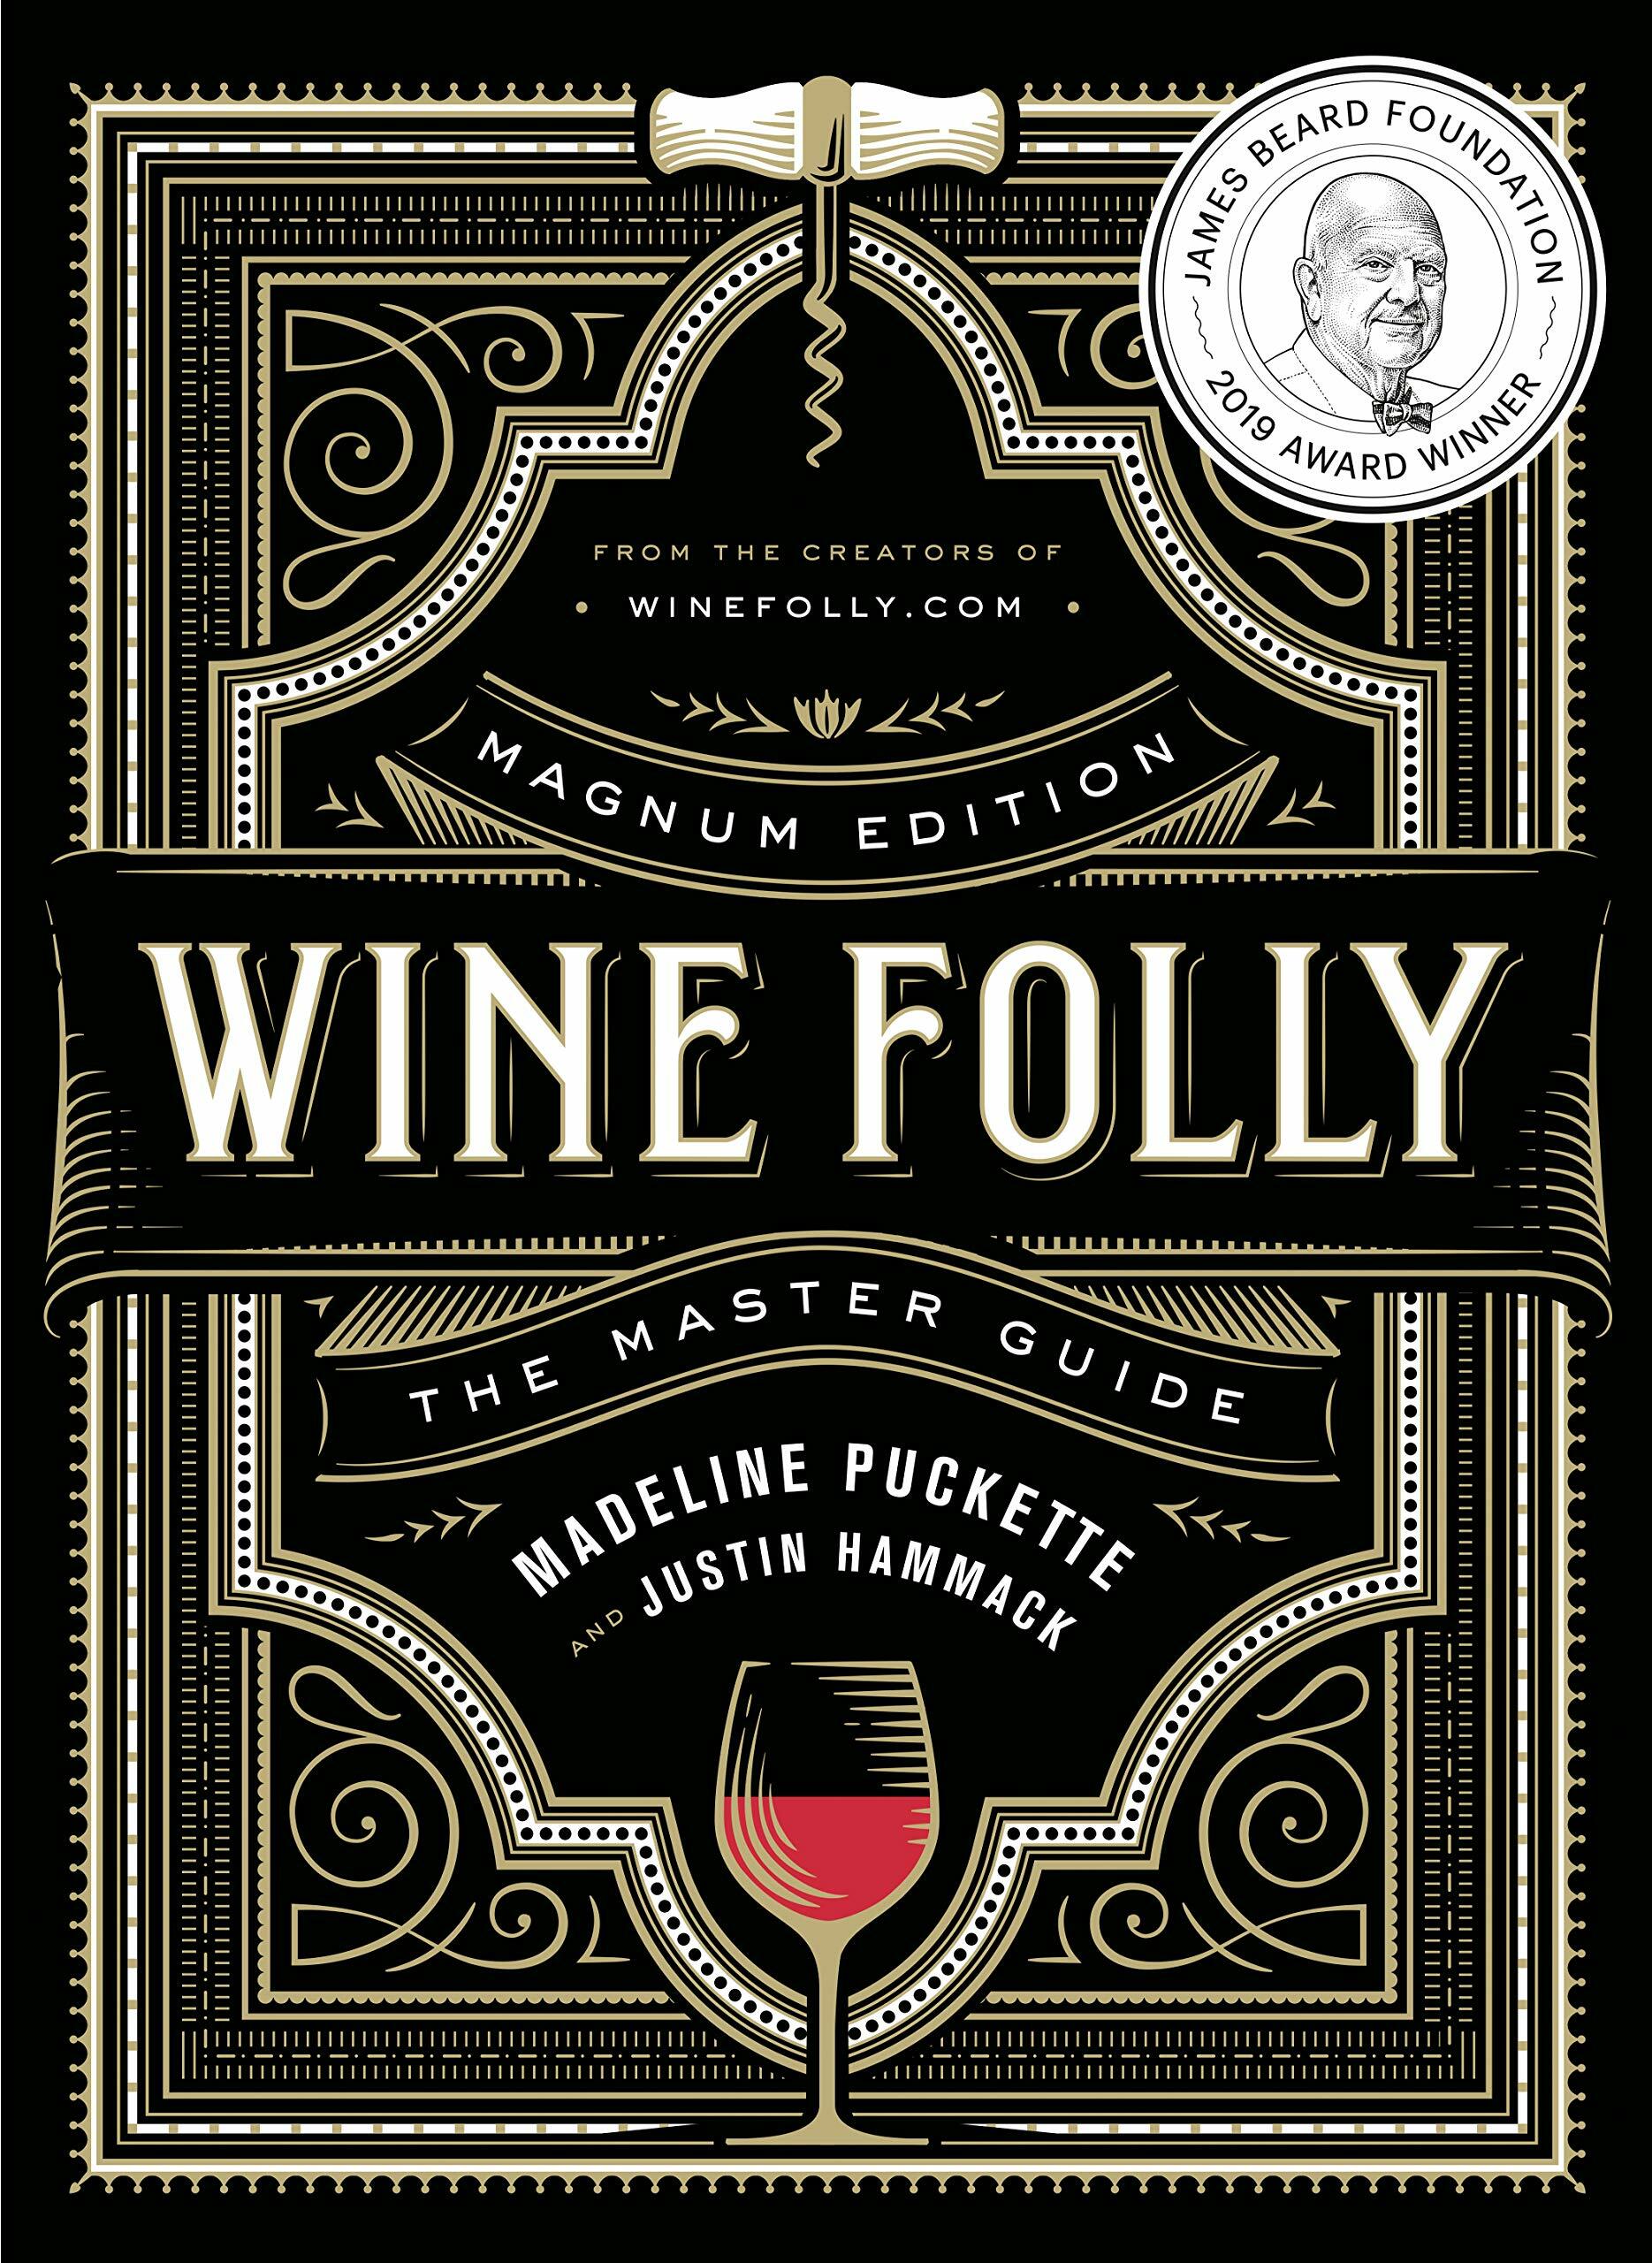 Wine Folly: Magnum Edition: The Master Guide (Hardcover)